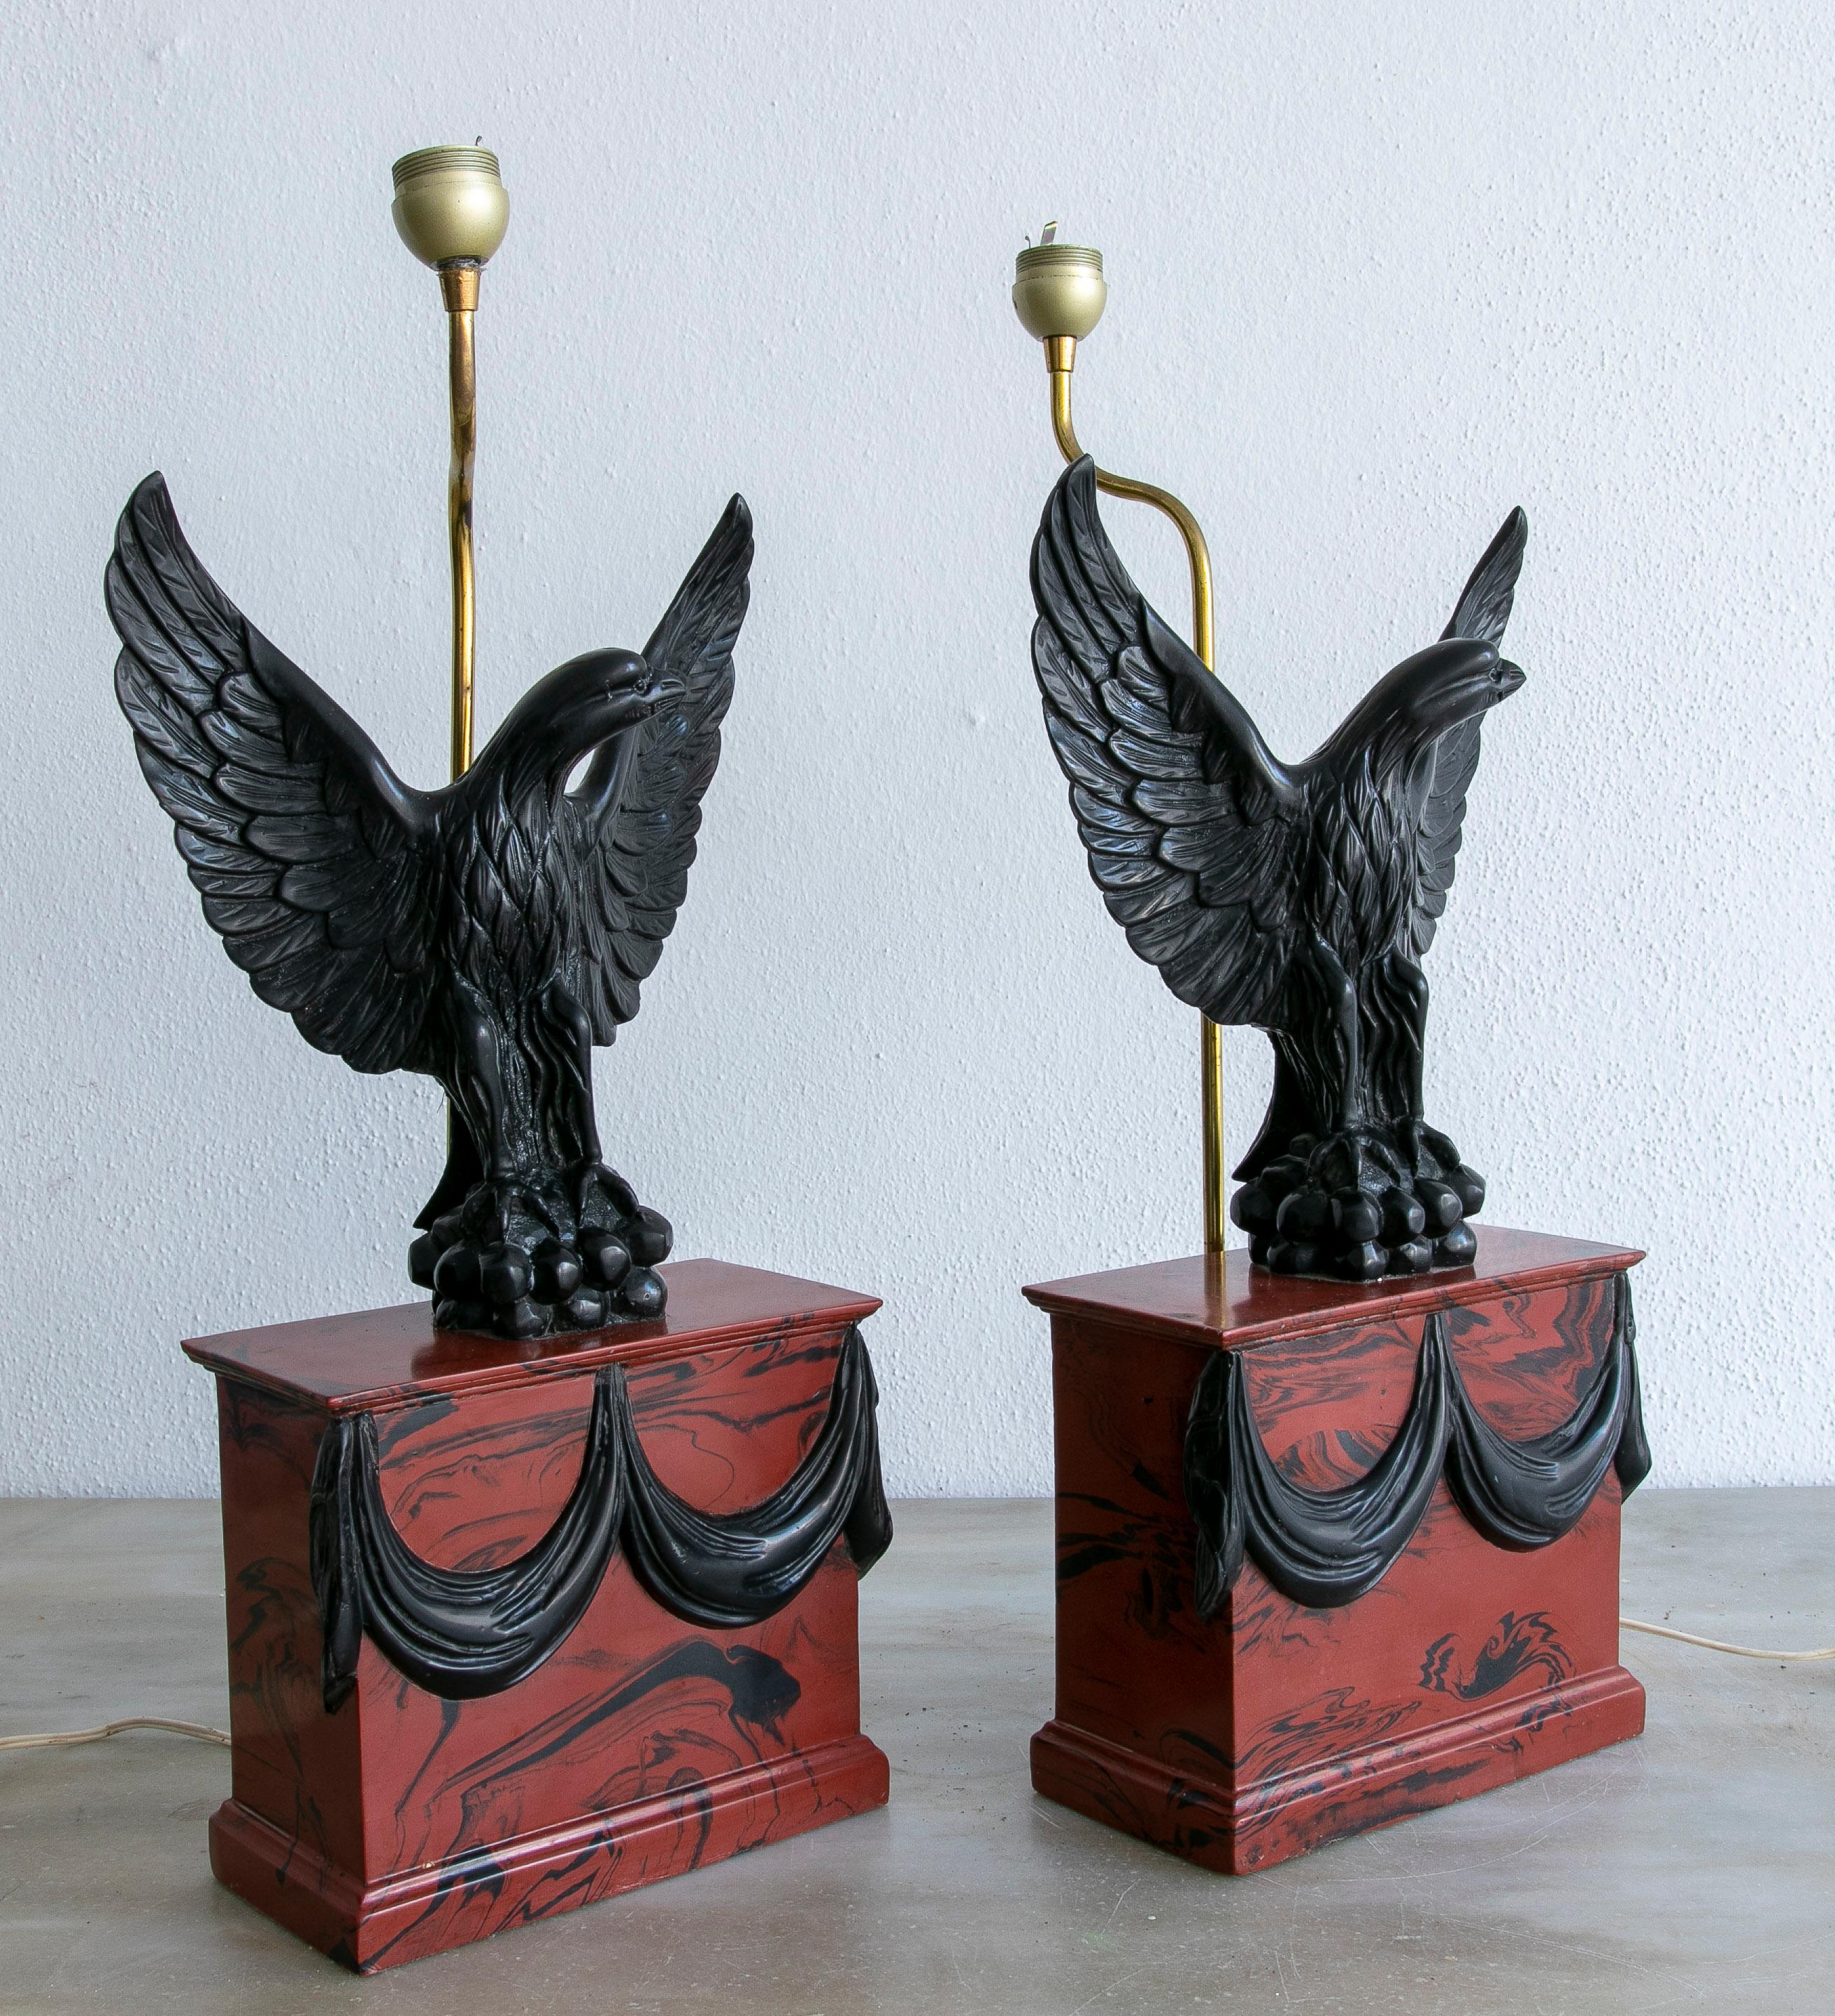 Pair of 1970s Italian faux marble resin table lamps with eagle figure sculptures.